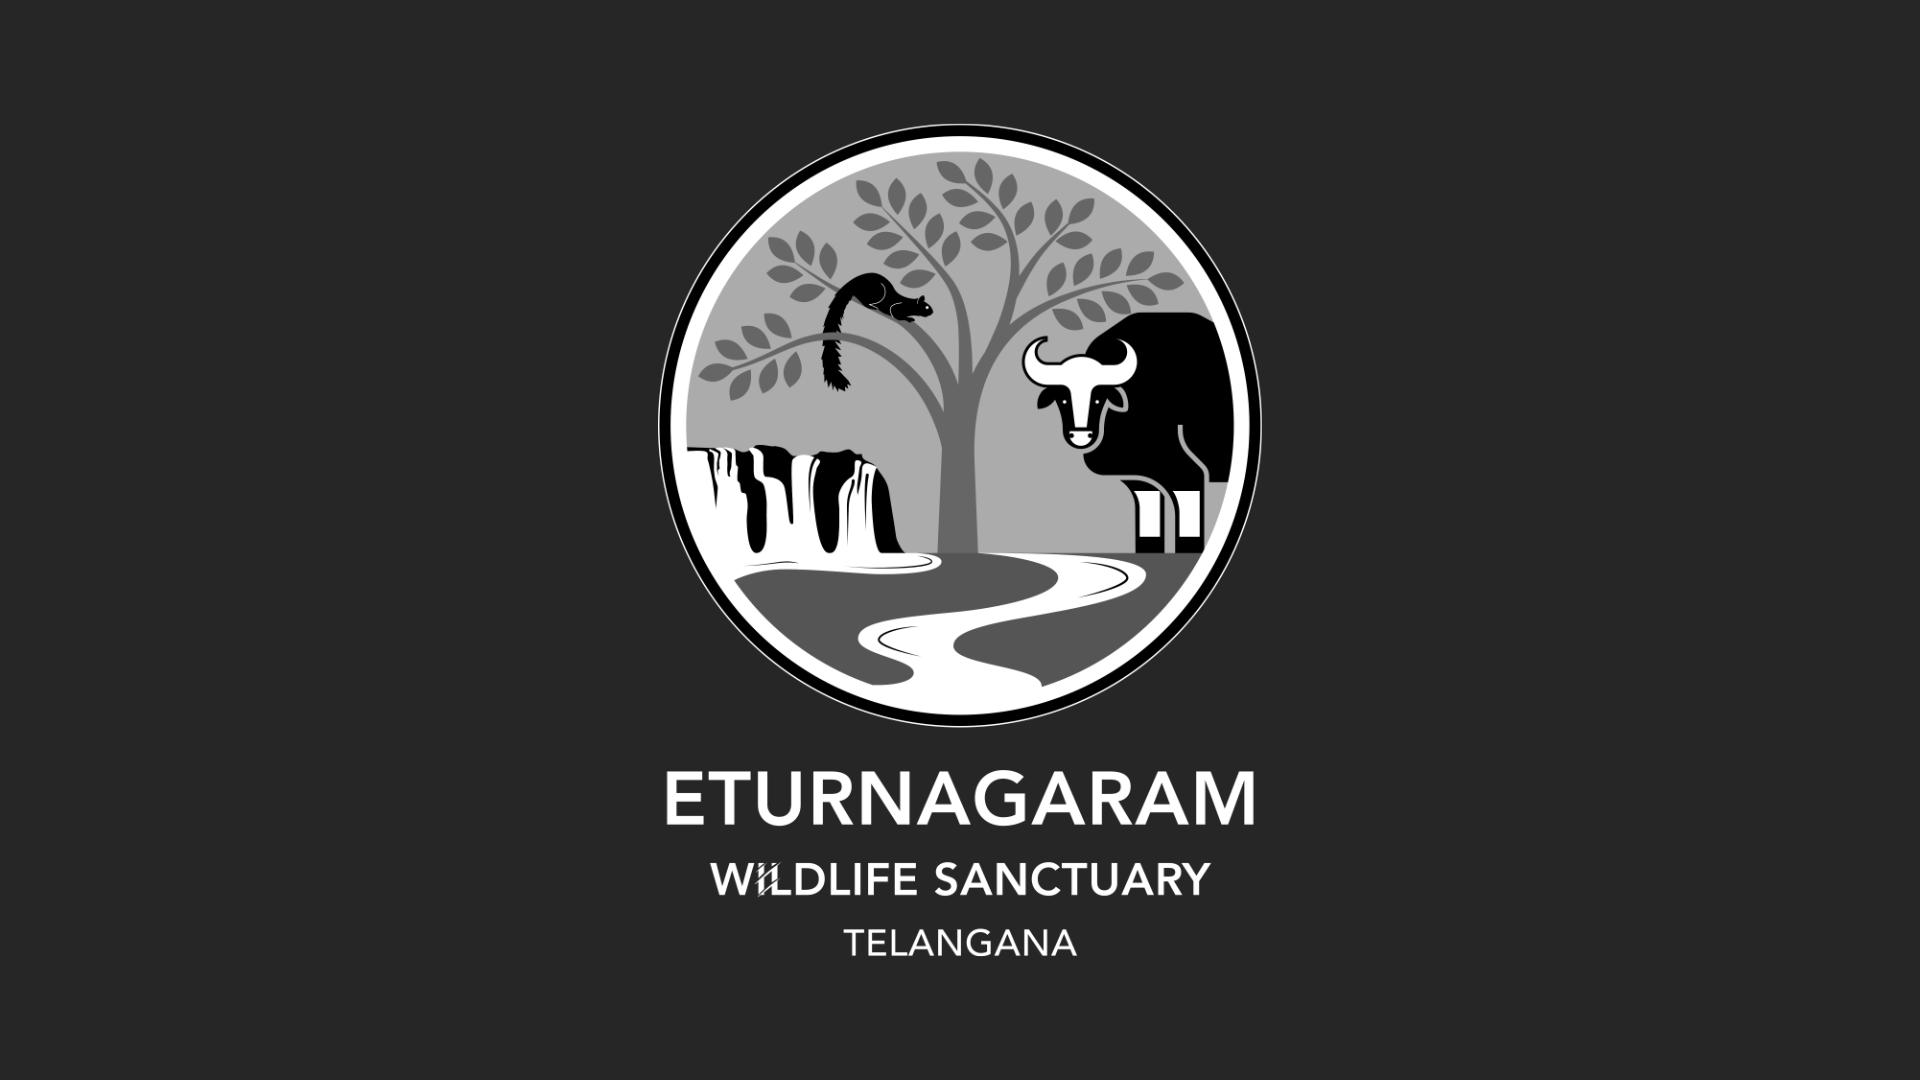 The famous Bogatha waterfalls are also represented as part of Telanganaâ€™s eco-tourism pledge. The tree is inspired after Cheriyal style painting to have the cultural annotation corresponding to the territory.